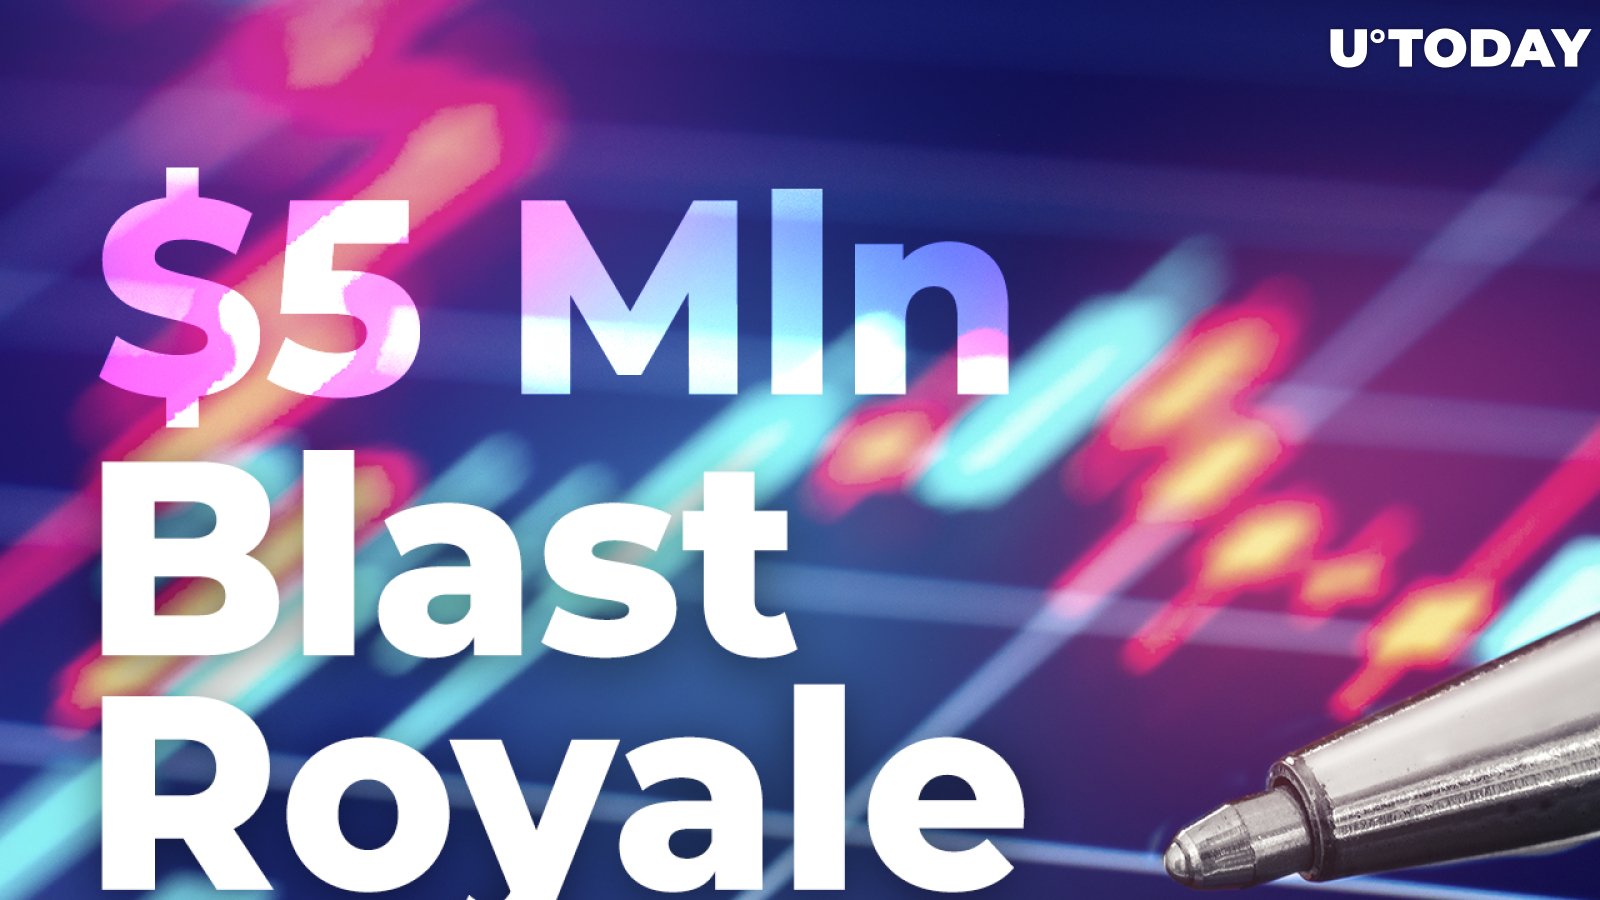 Polygon-based Blast Royale (BLST) Completes Seed Funding with $5 Million Raised